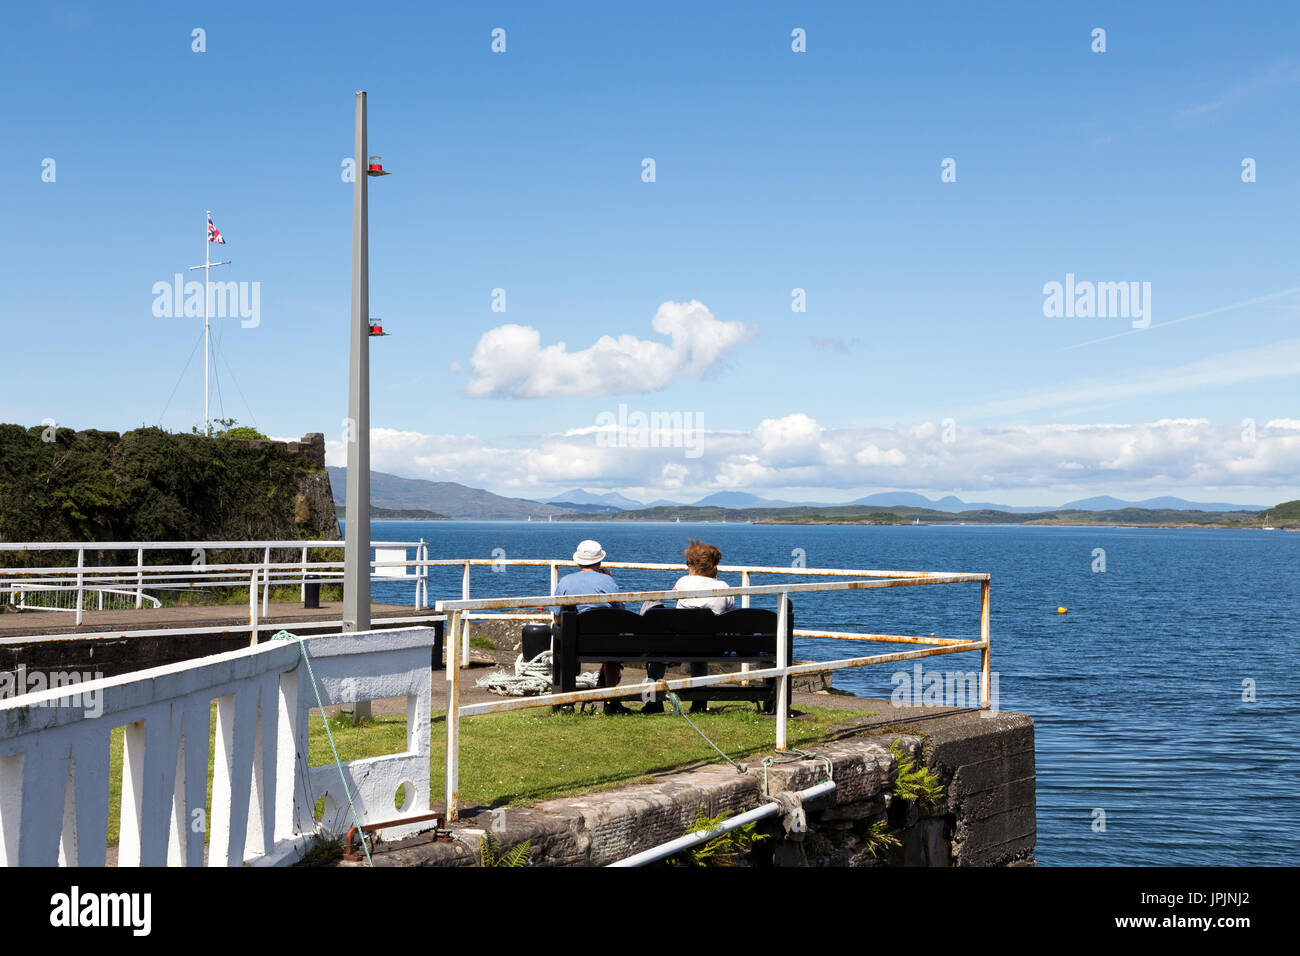 Tourists relaxing at the Crinan Canal, Argyll & Bute, Scotland, United Kingdom Stock Photo